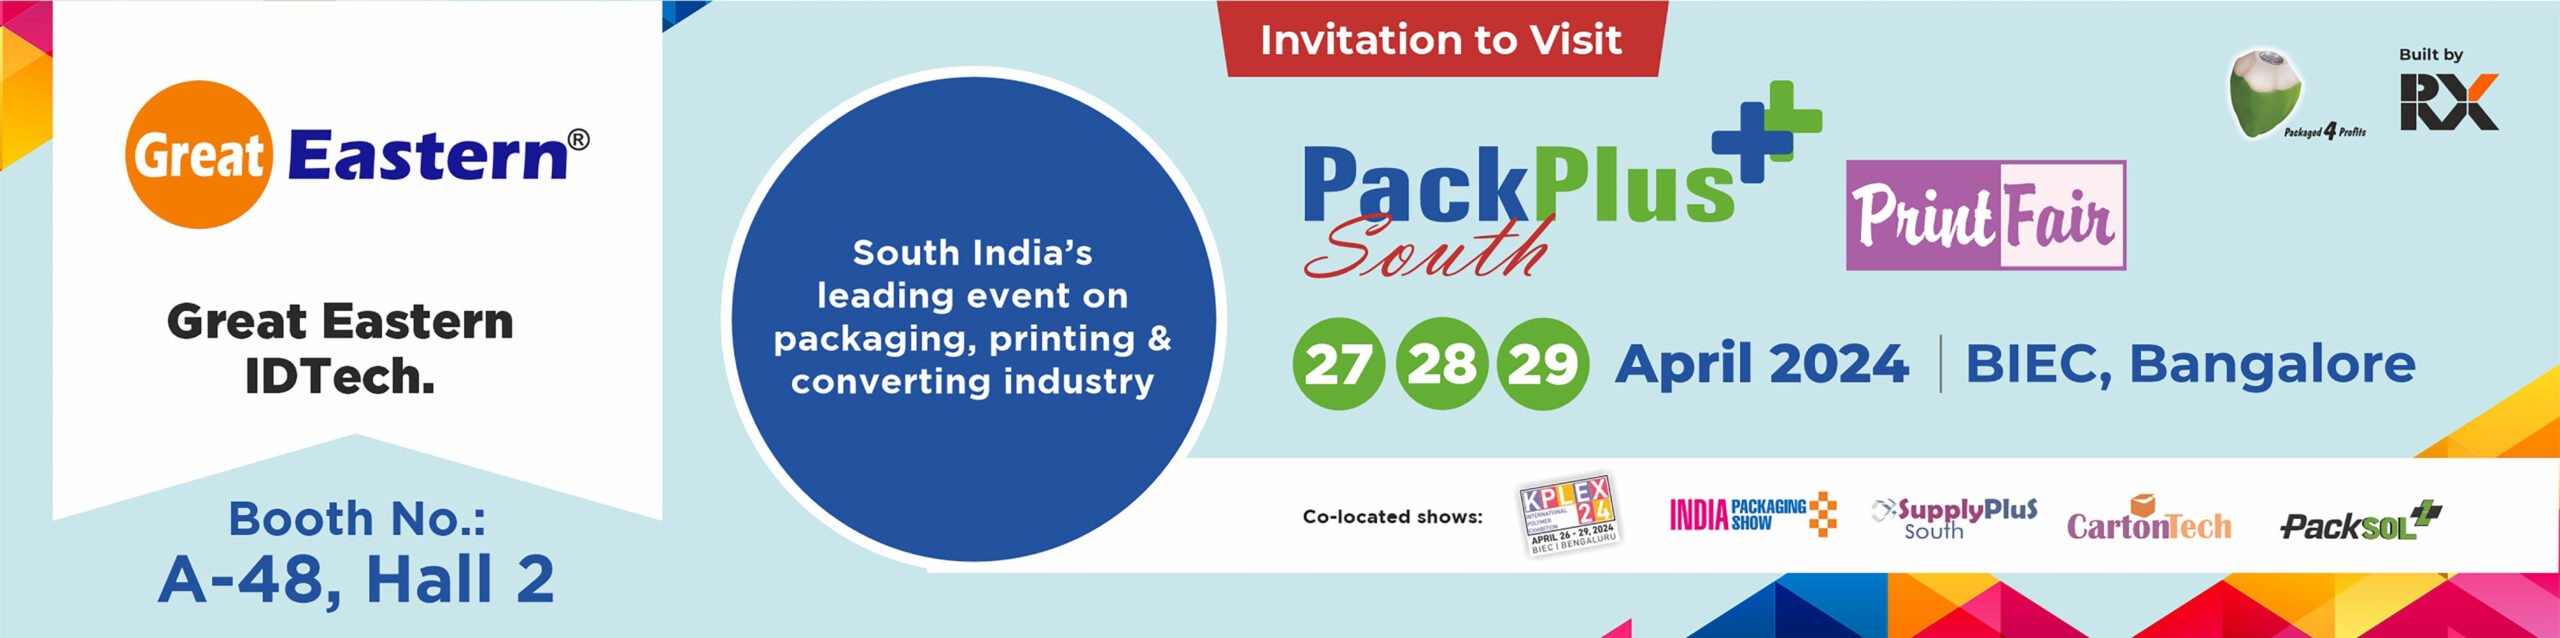 PackPlus South 2024